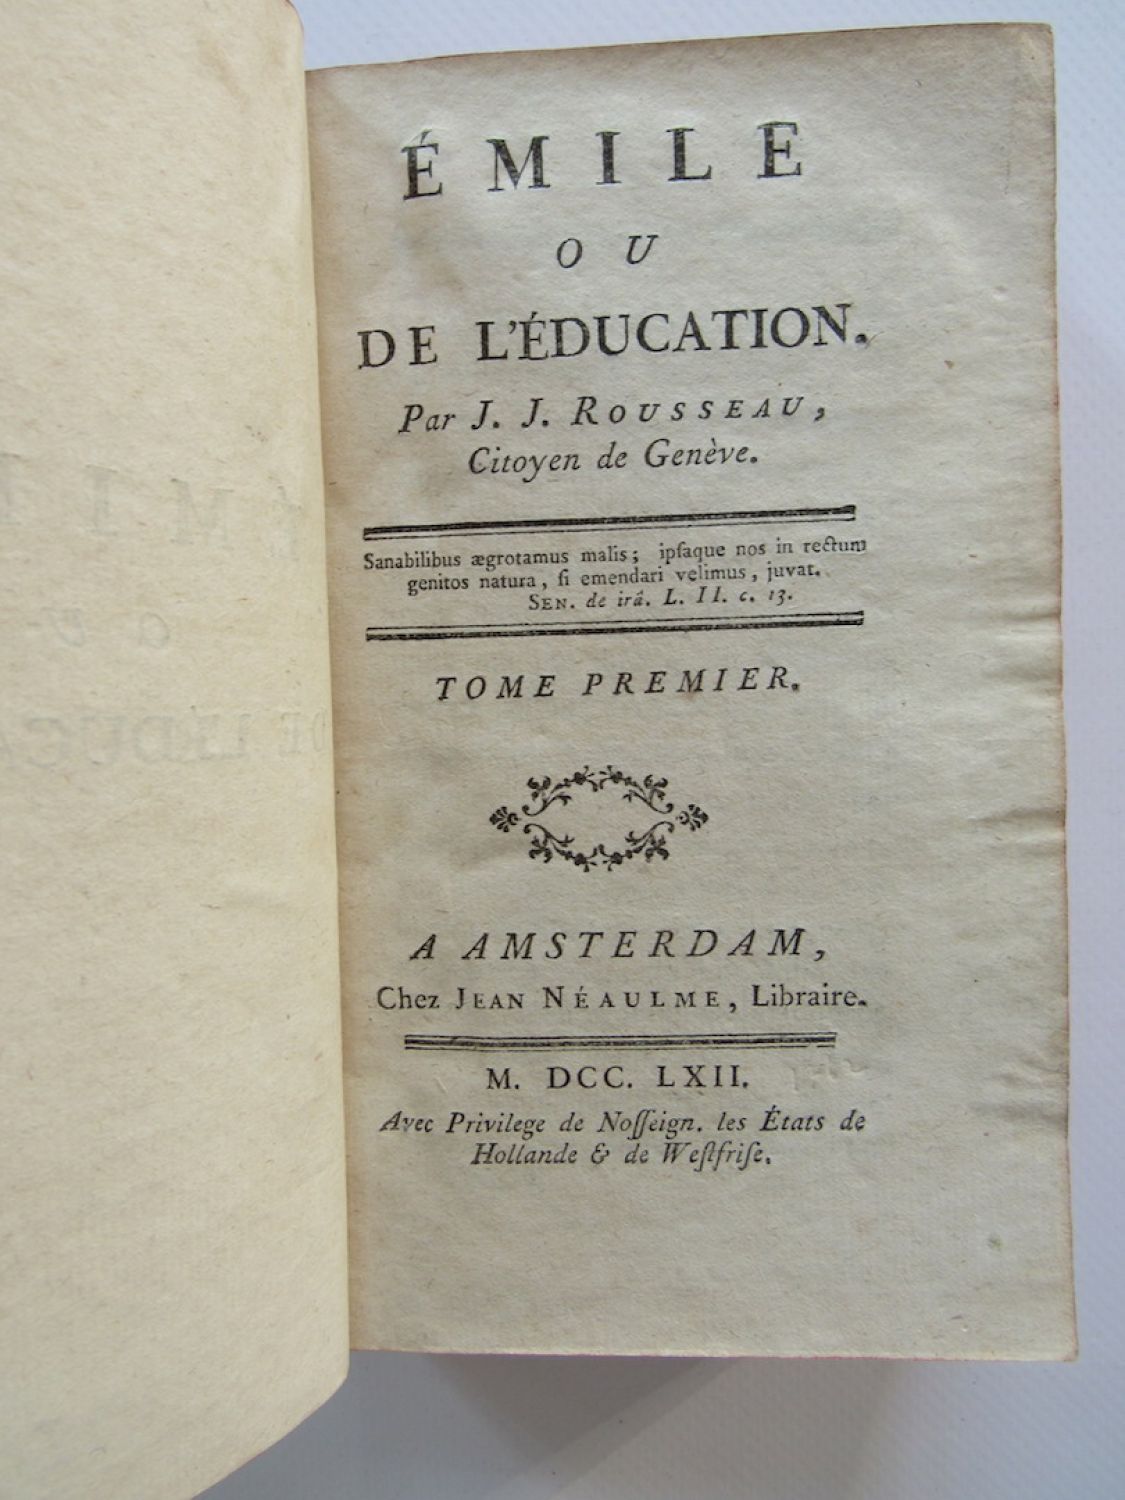 emile book by rousseau